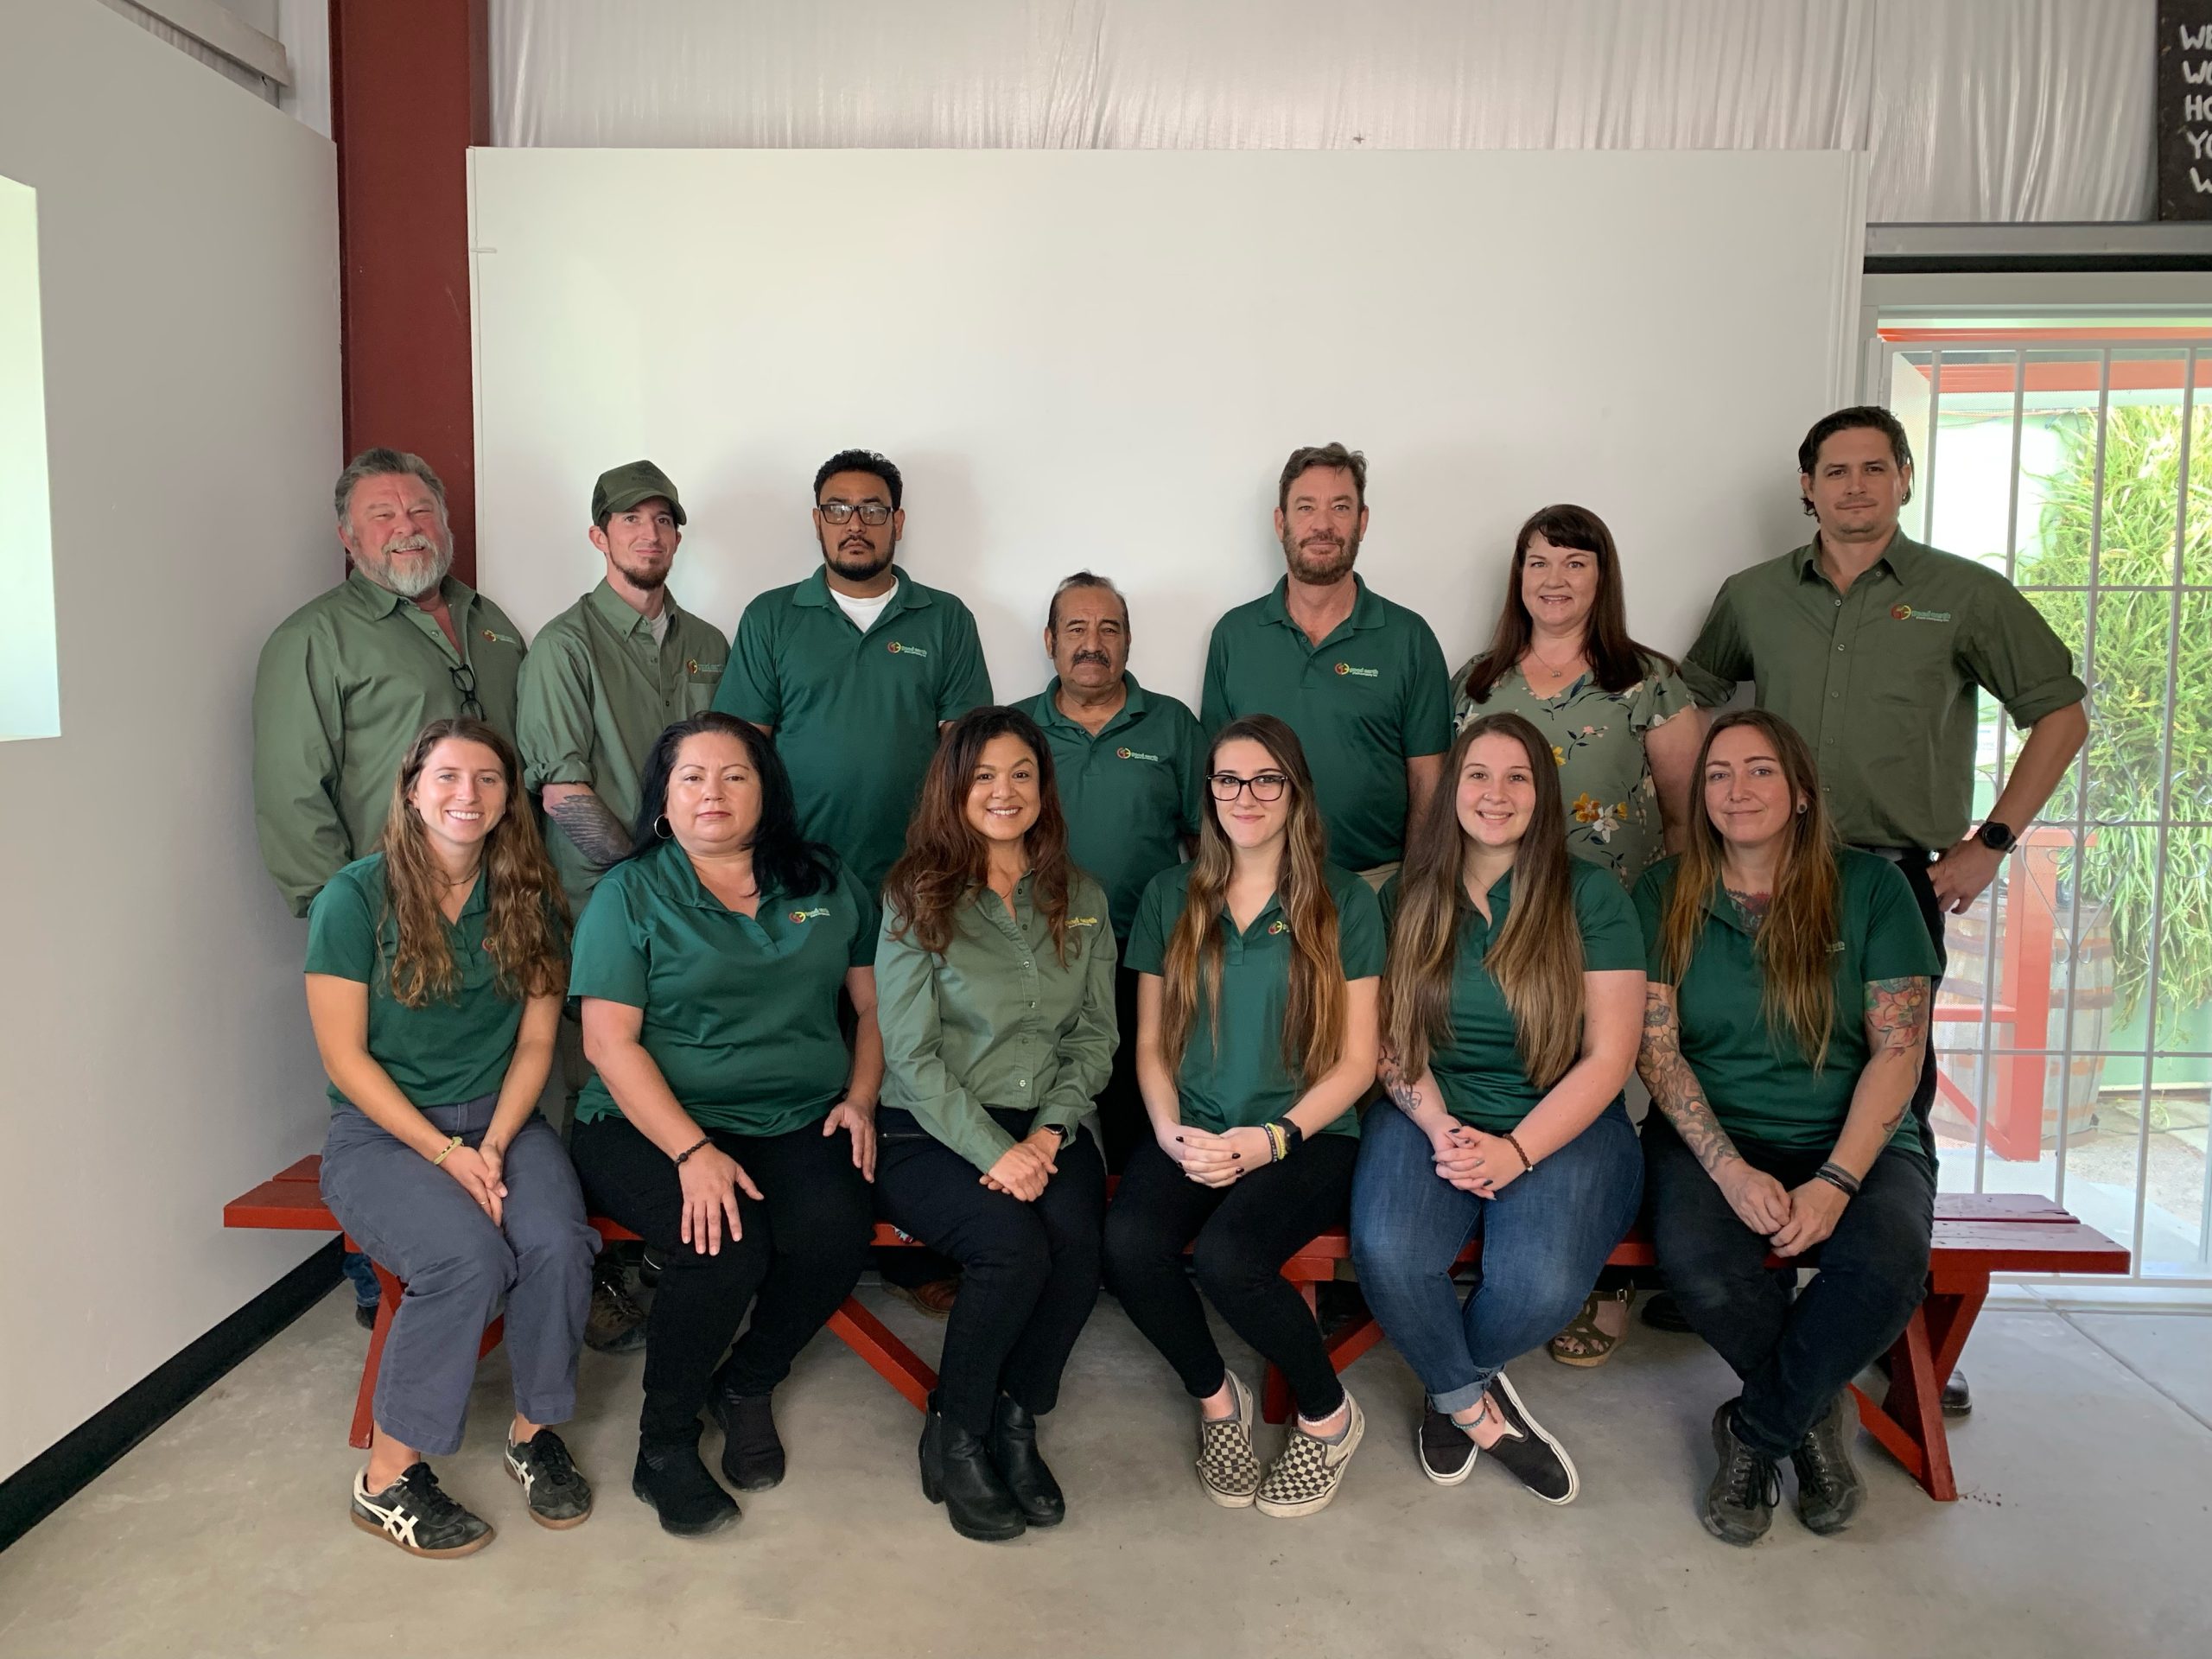 Without any doubt, the best group of employees I've ever been fortunate to have as part of the Good Earth Plant Company team. Thanksgiving 2021